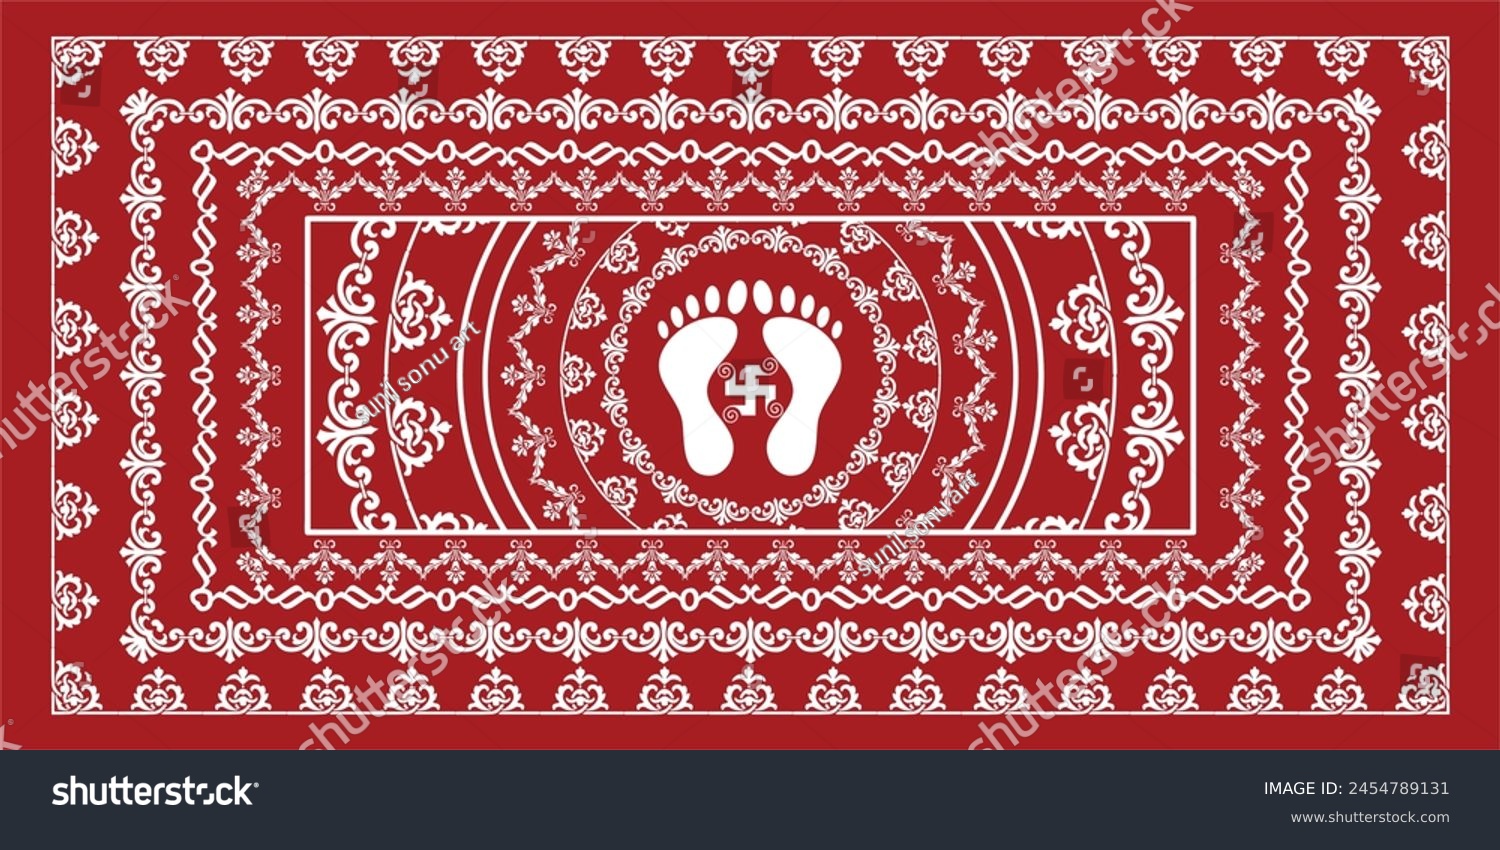 SVG of Aipan Design pattern for india festival vector red and white color svg